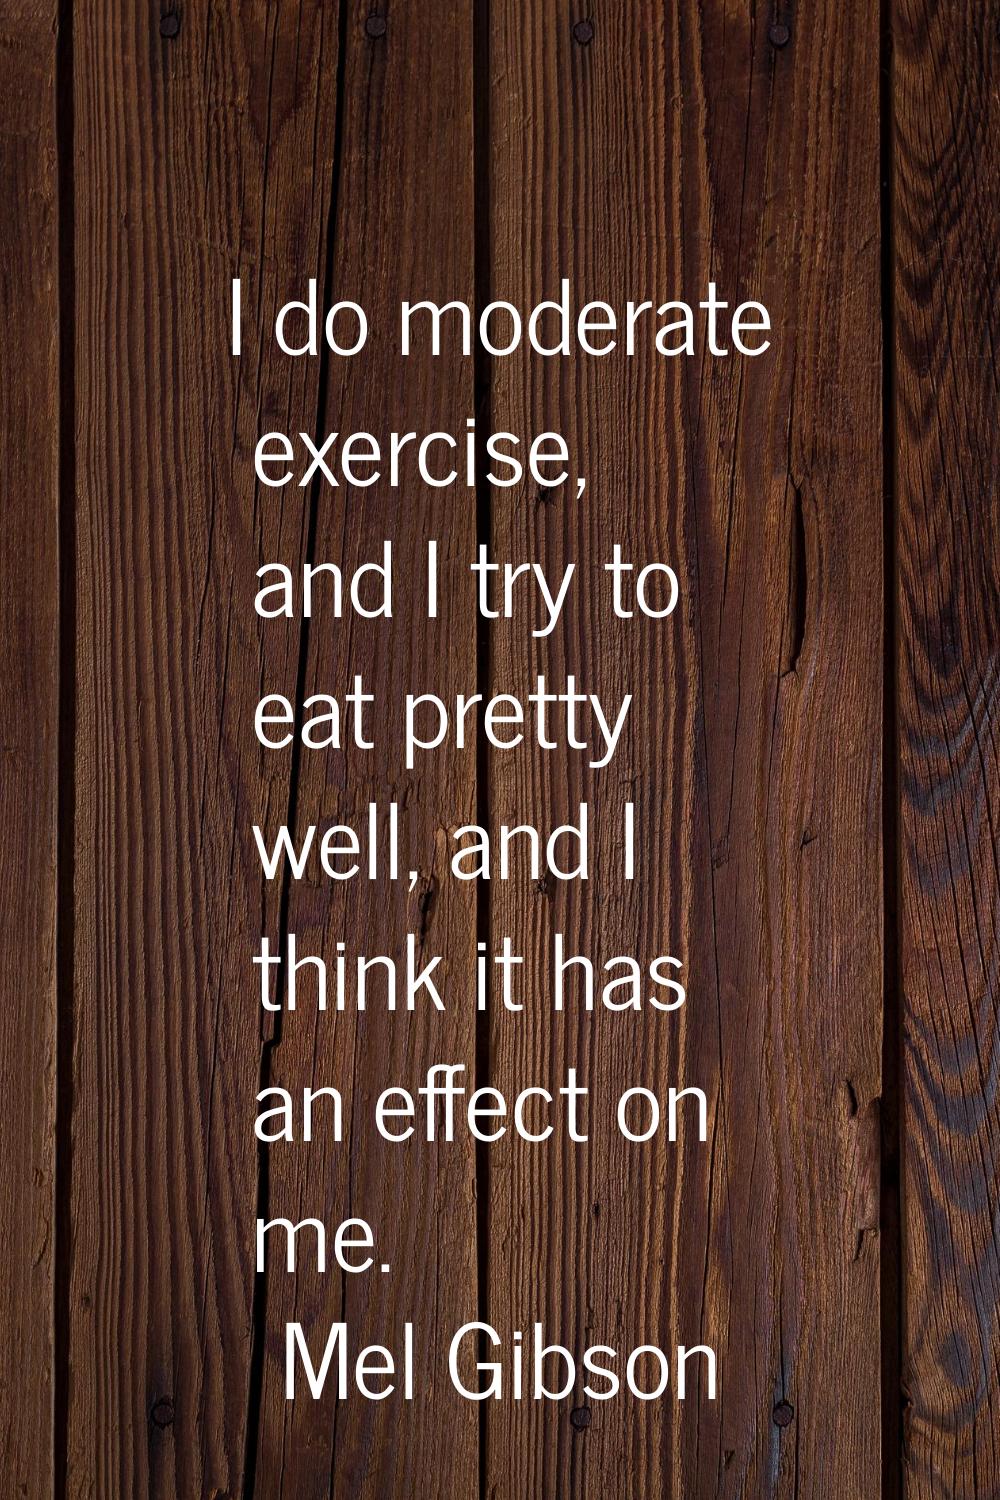 I do moderate exercise, and I try to eat pretty well, and I think it has an effect on me.